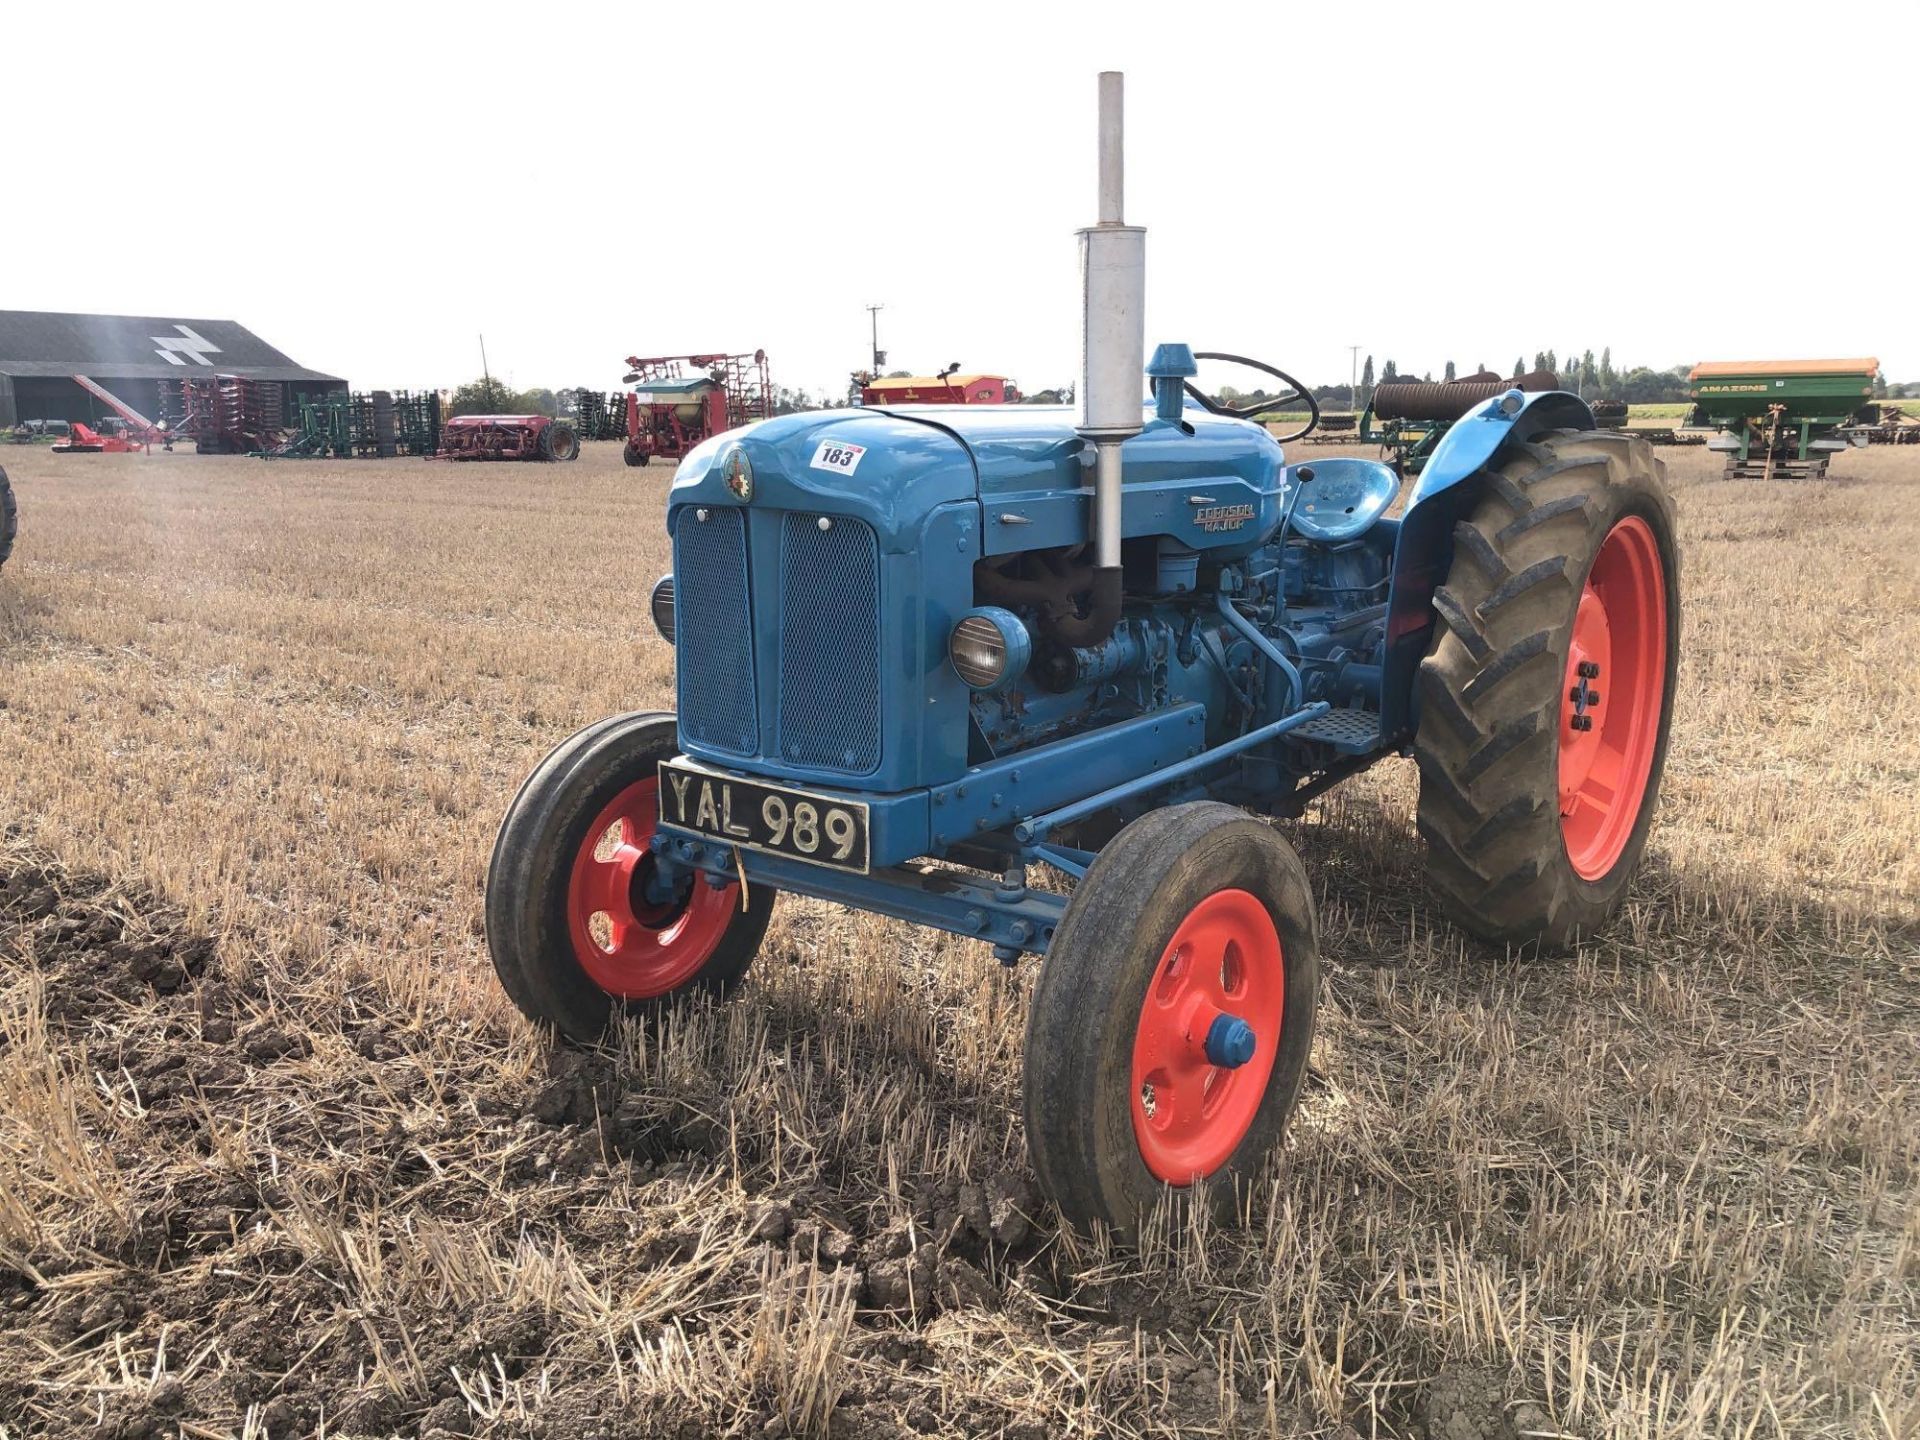 1958 Fordson Major diesel 2wd tractor with side belt pulley, rear linkage and drawbar on 6.00-19 fro - Image 2 of 6